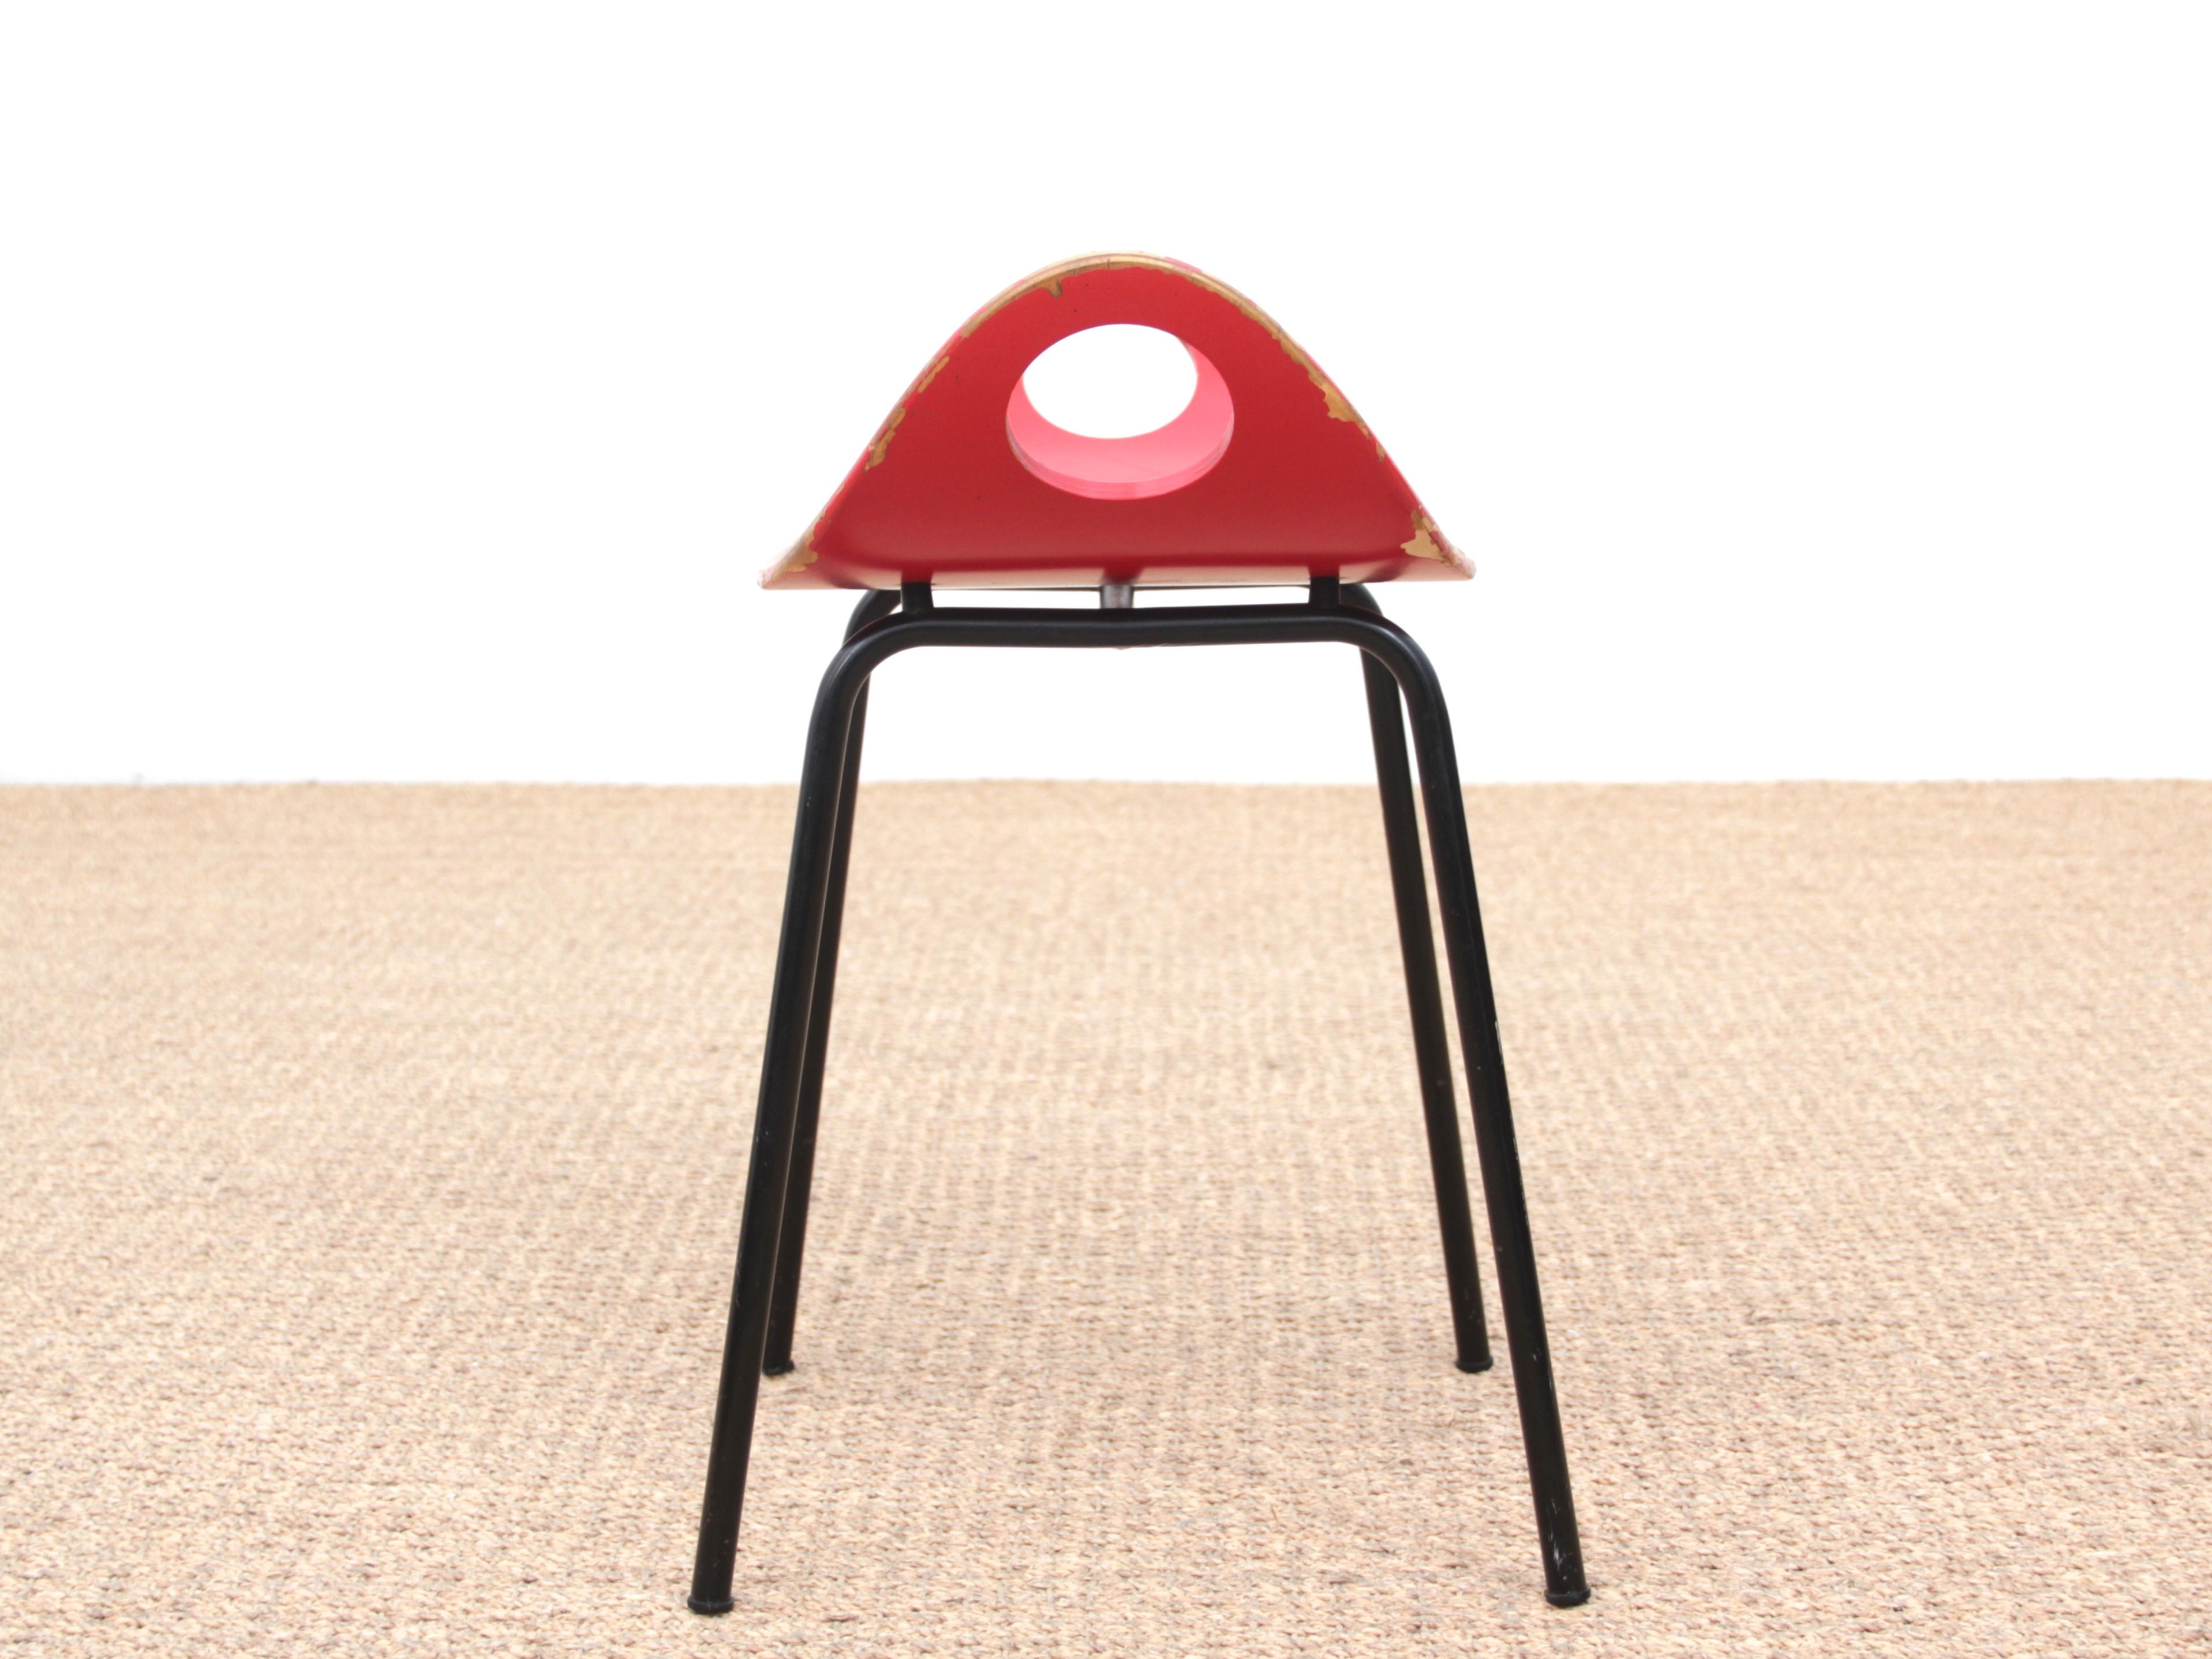 Scandinavian stool by Olof Kettunen for J. Merivaara Oy, circa 1950.
Seat in red lacquered plywood. Black lacquered steel legs. Original painting. Get itsoriginal labels.